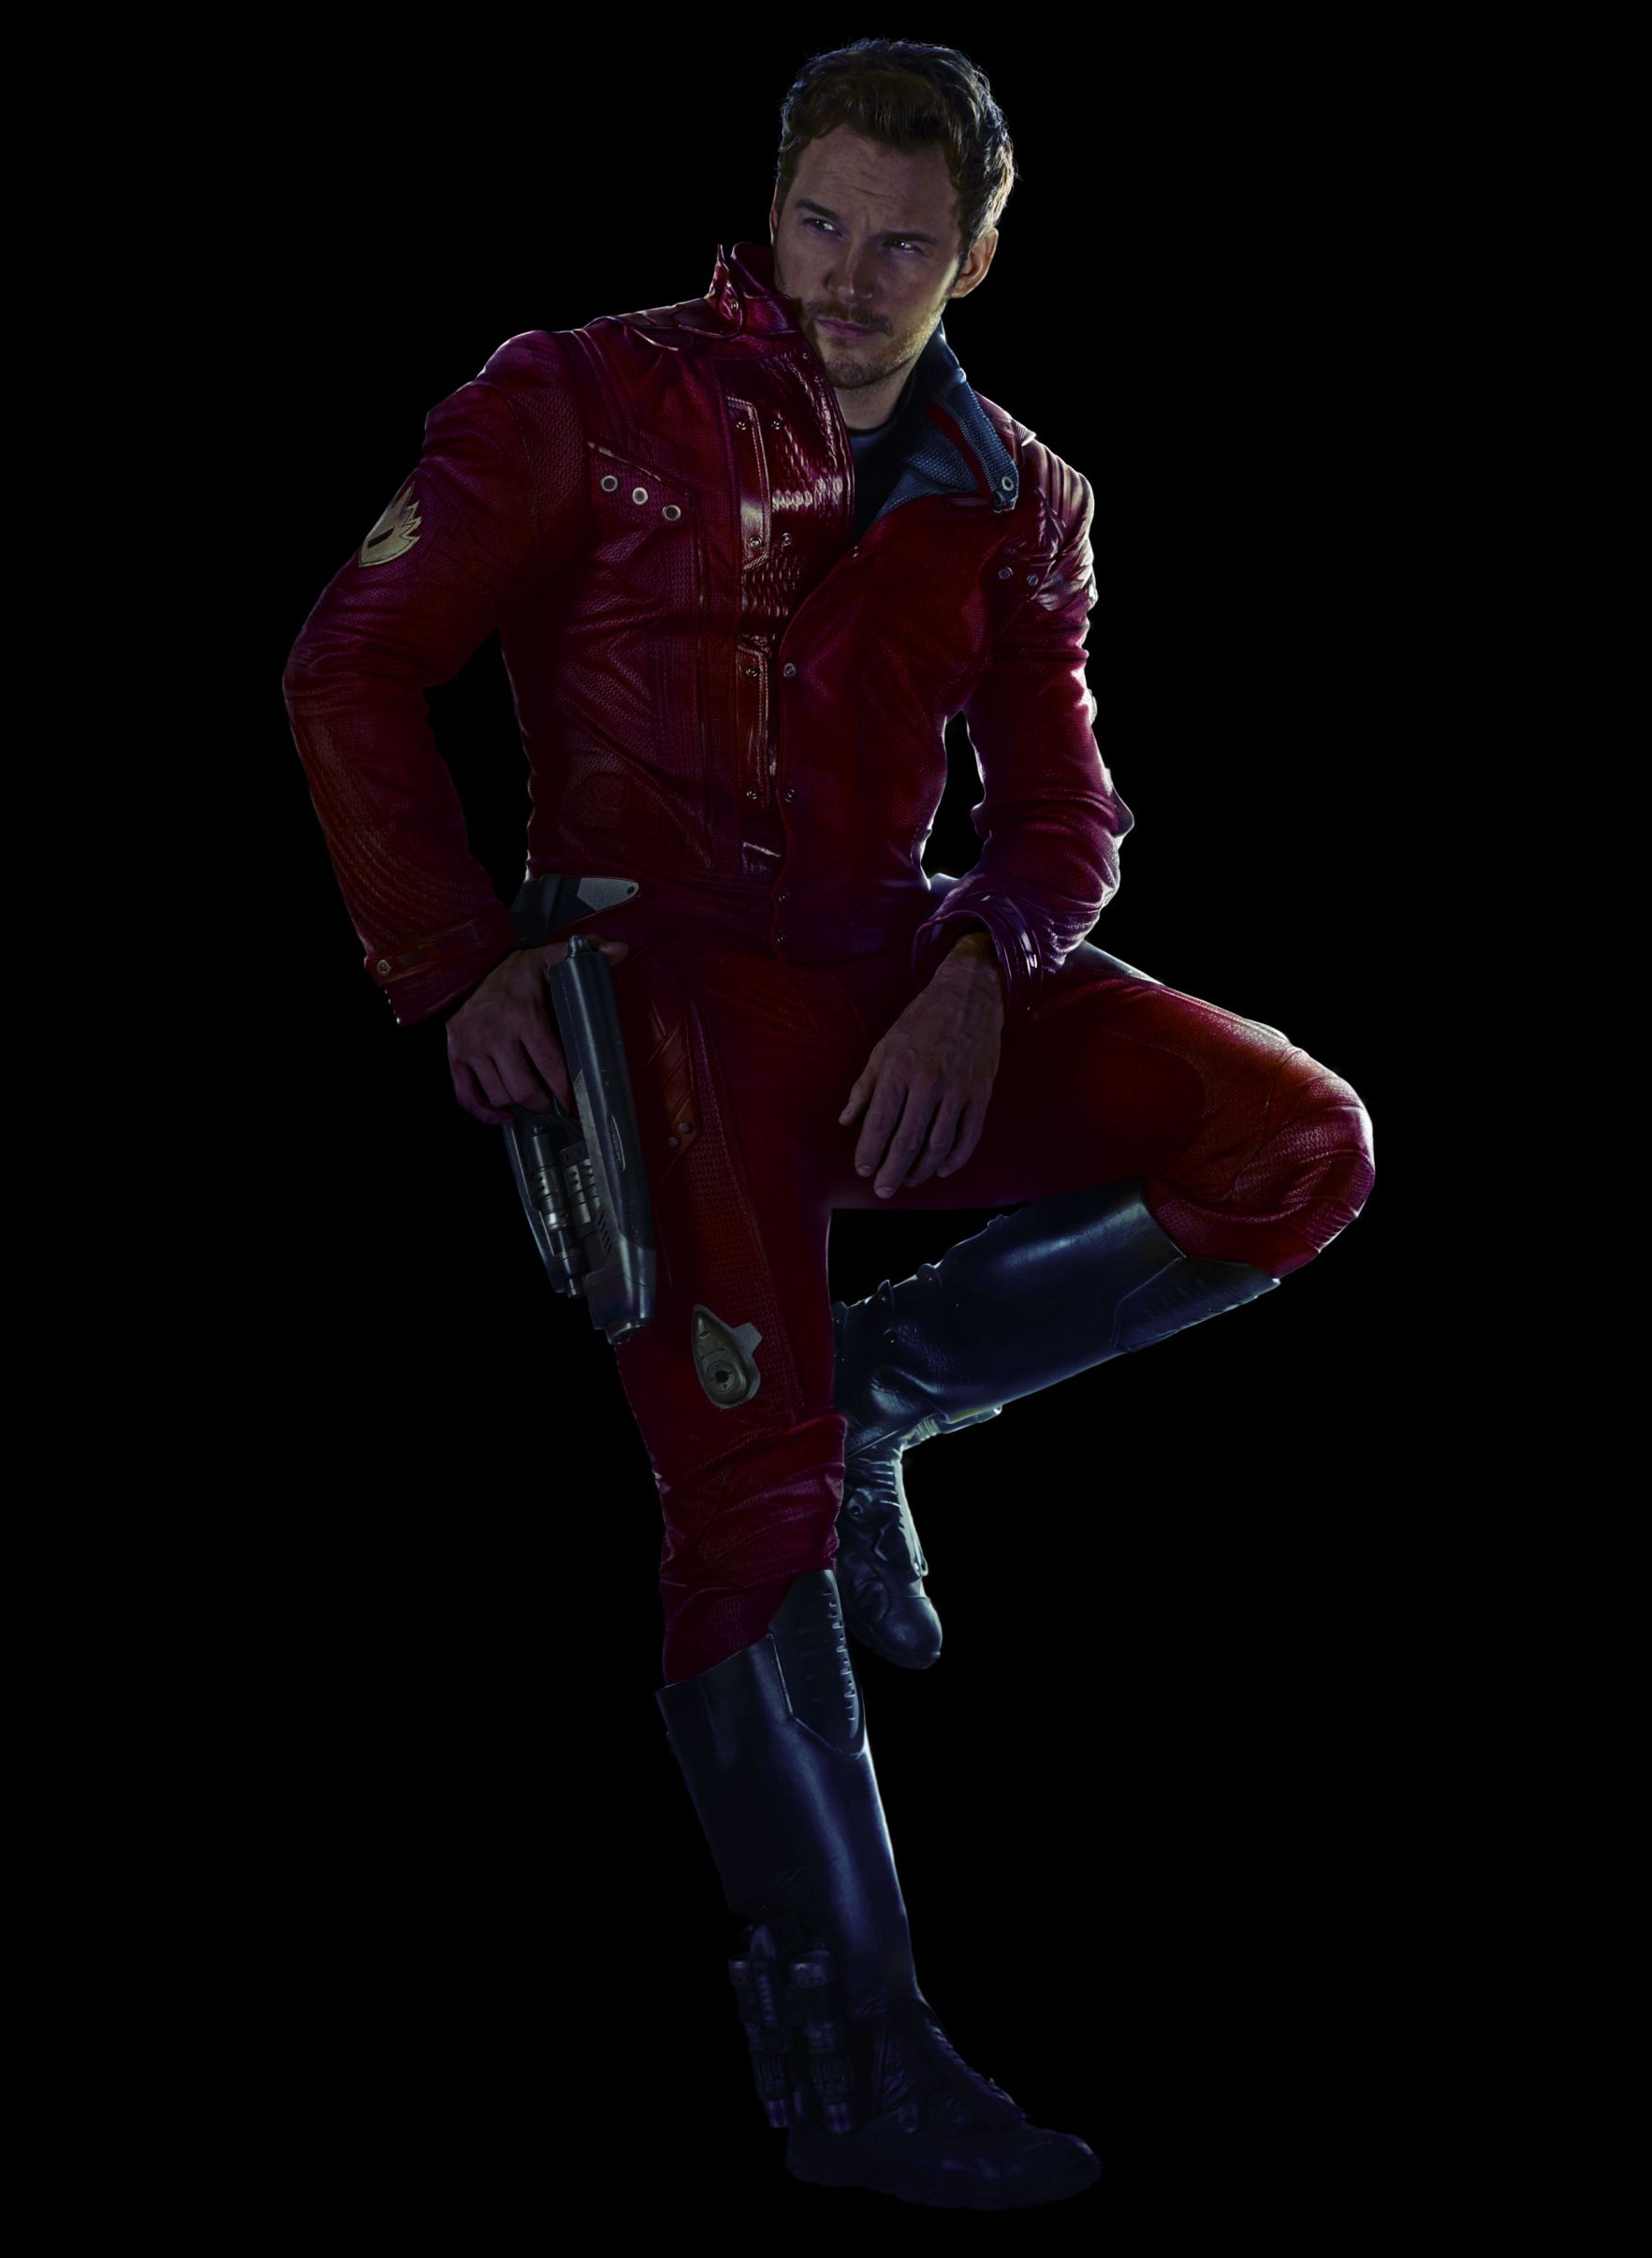 Chris Pratt as Star-Lord / Peter Quill character